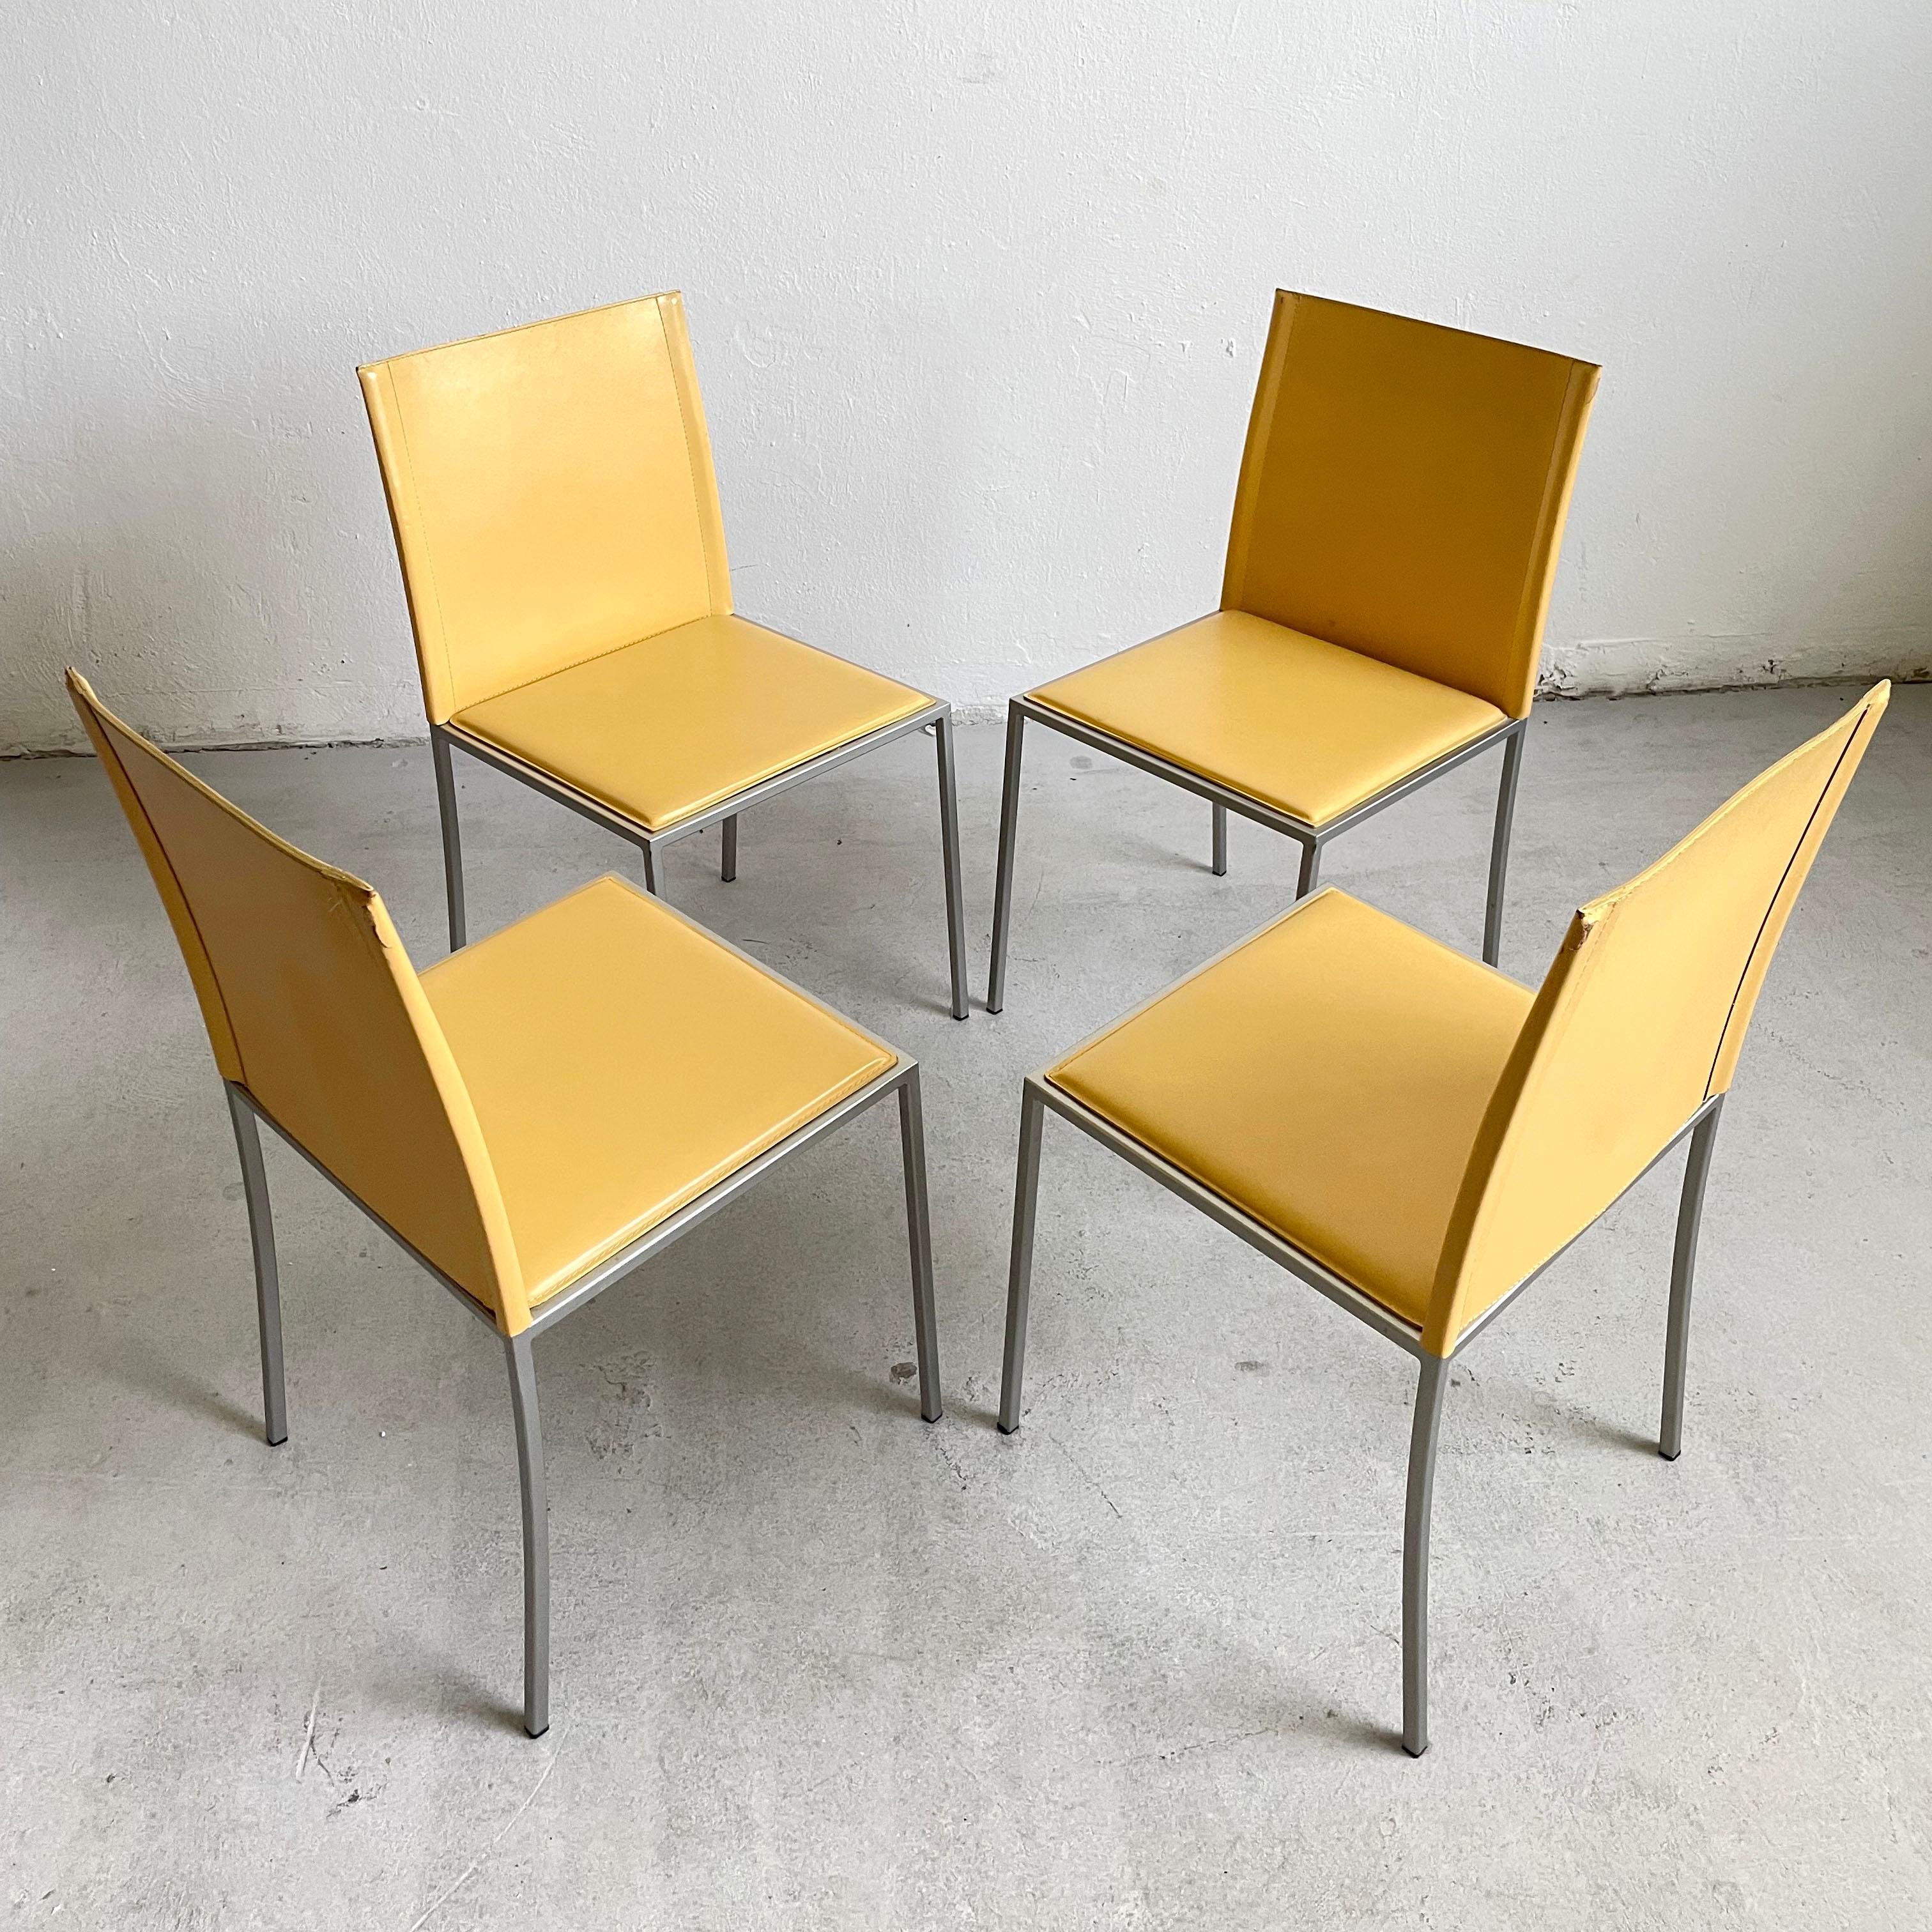 Powder-Coated Set of 4 Italian Minimalist Modernist Leather Chairs by Calligaris, Italy 1990s For Sale